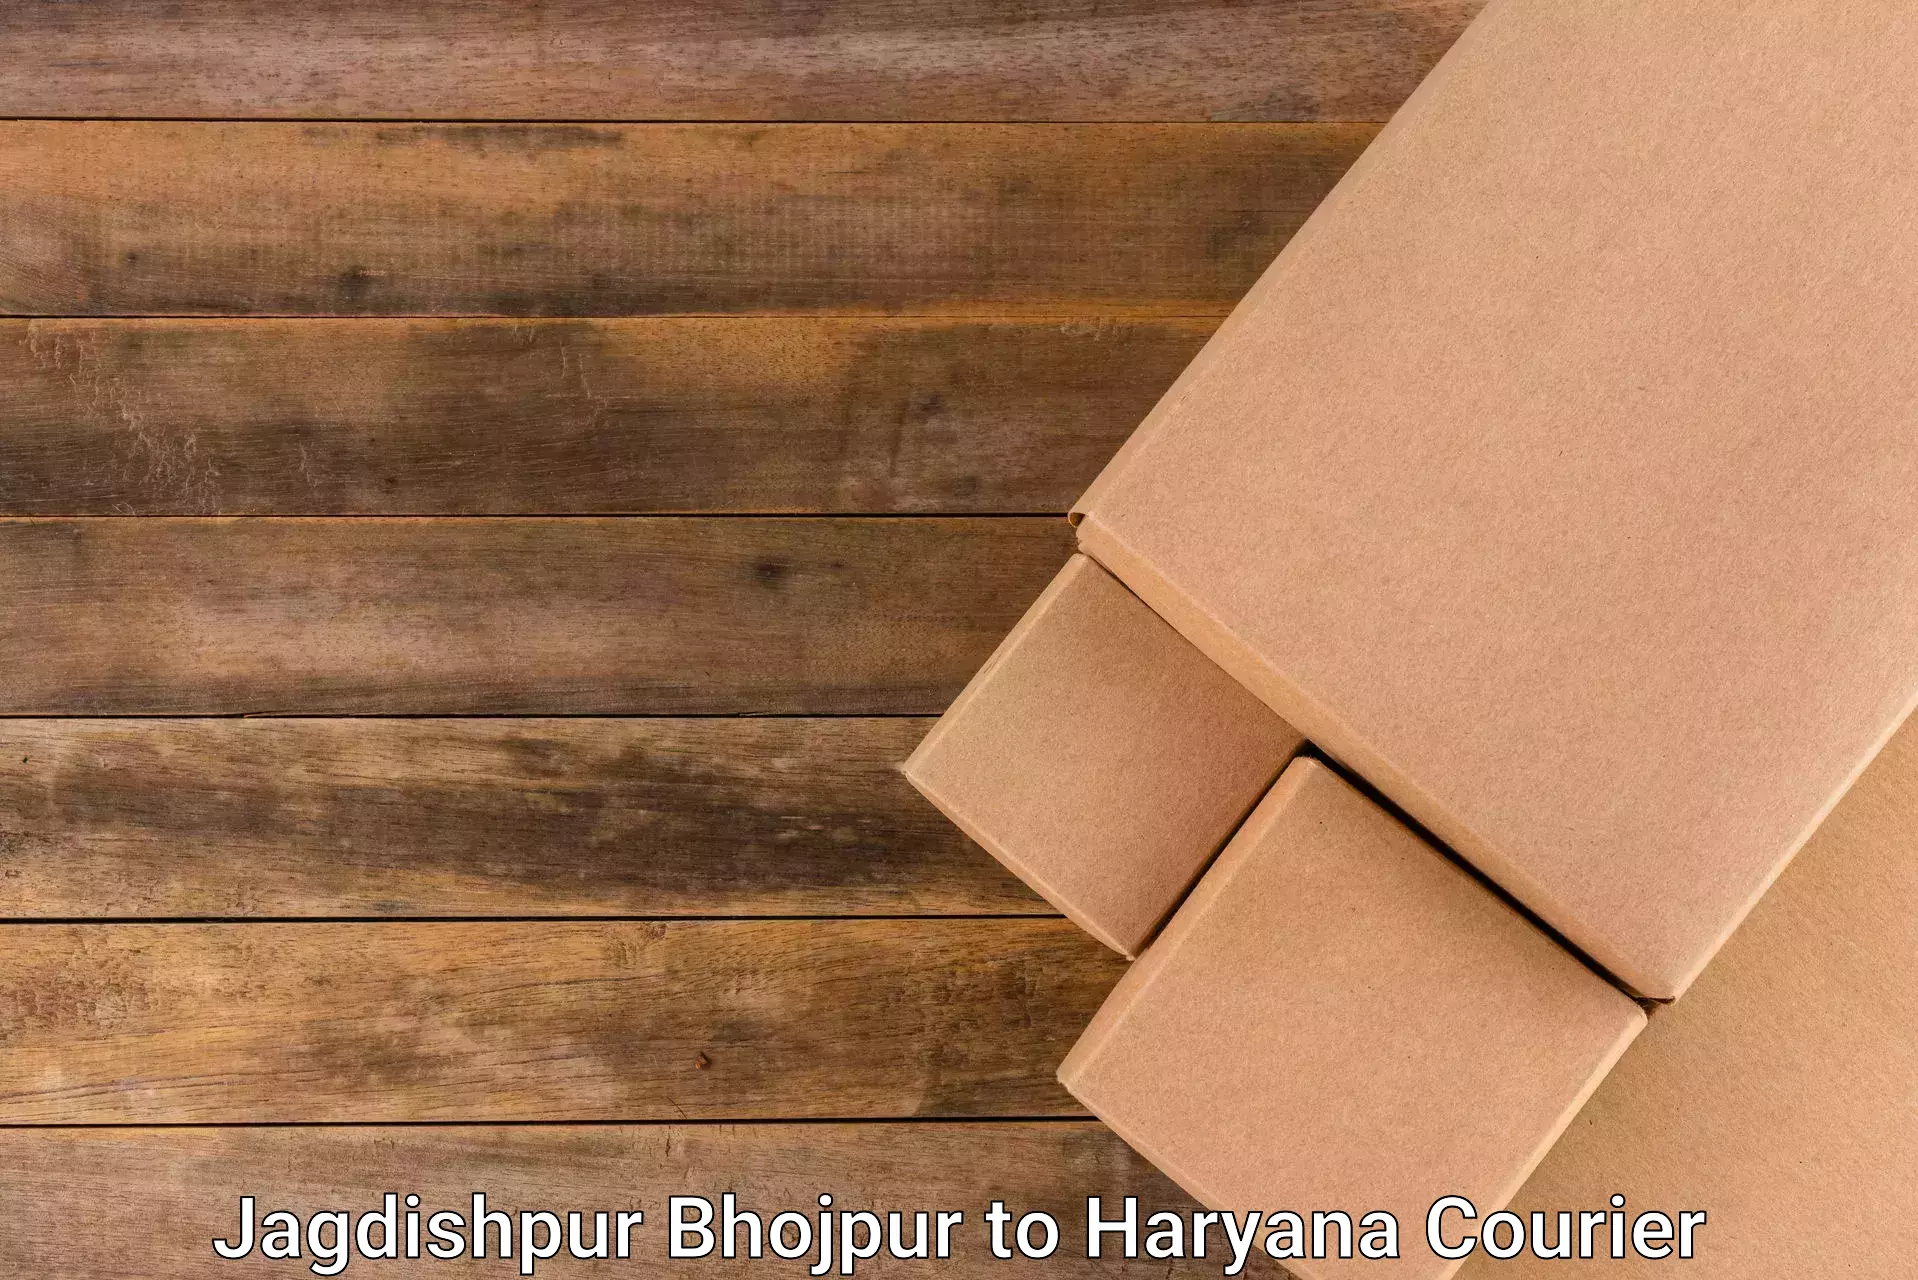 Cost-effective shipping solutions Jagdishpur Bhojpur to Haryana